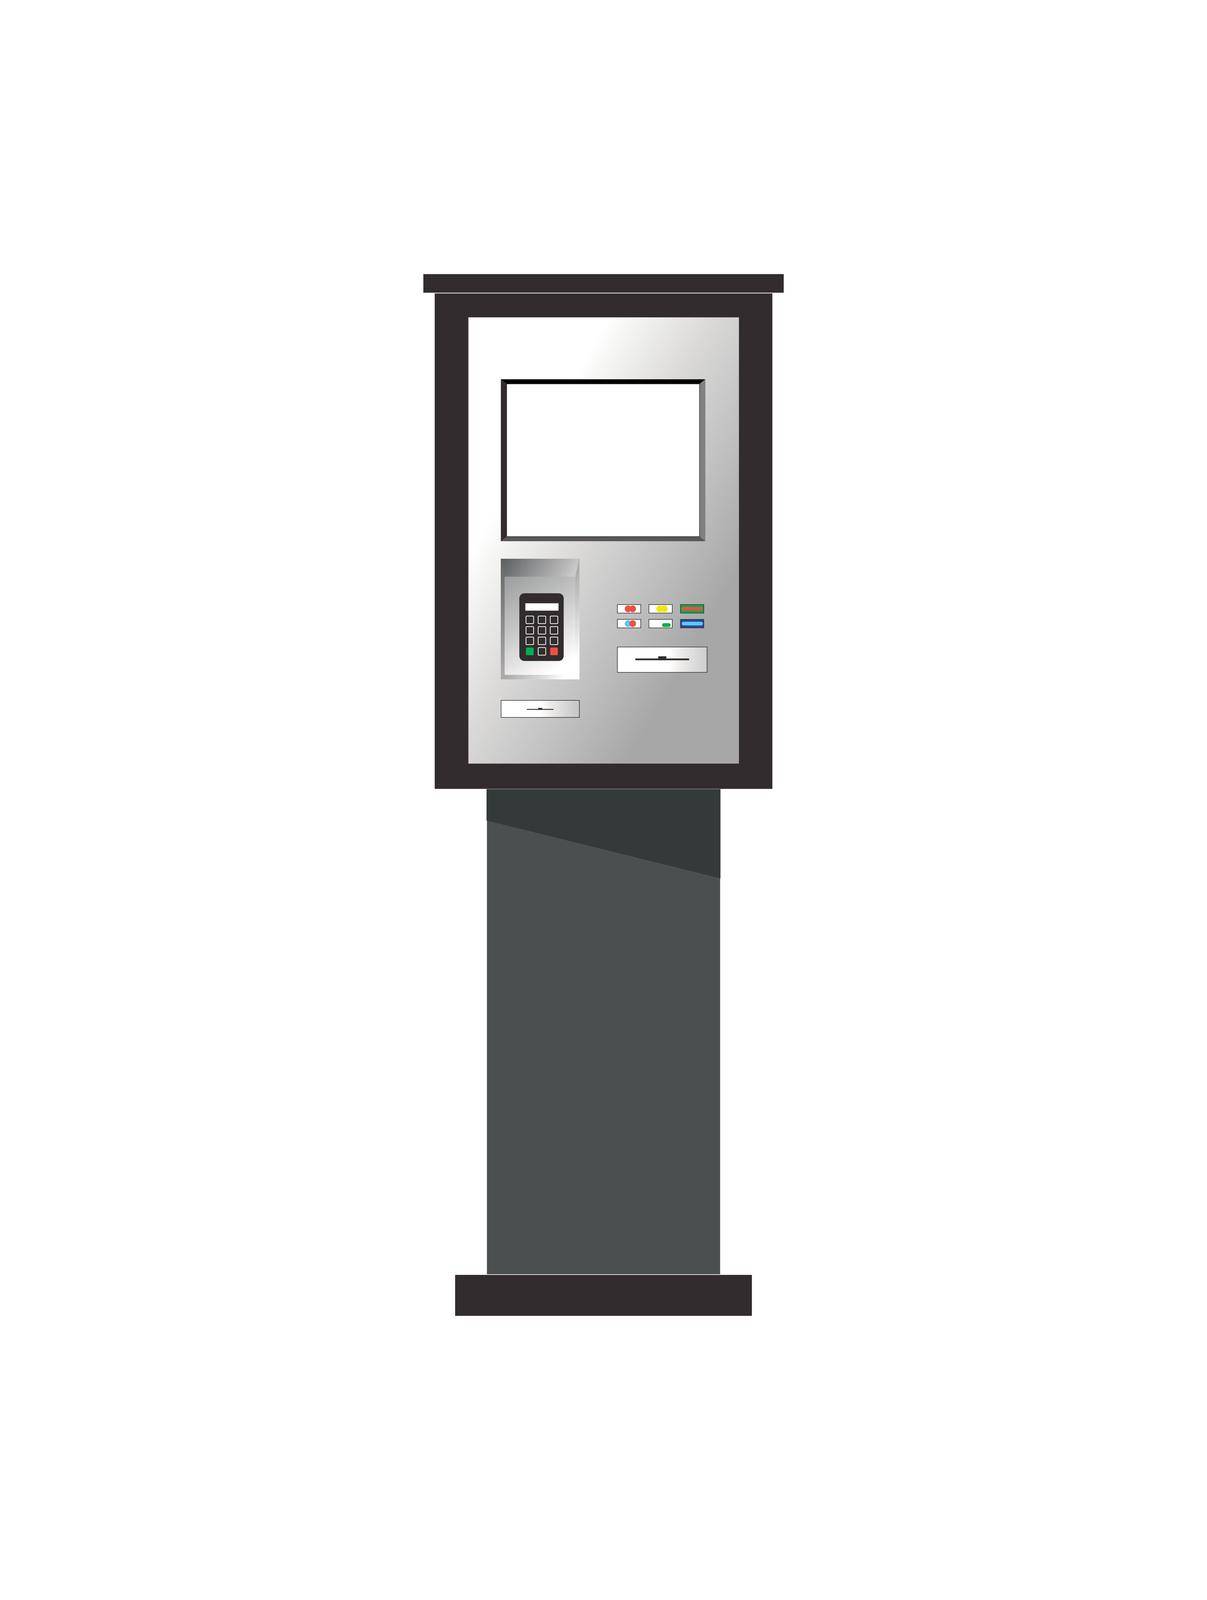 Self-service kiosk. Self-pay terminal for retail chains, parking lots, rentals. Vector flat illustration.